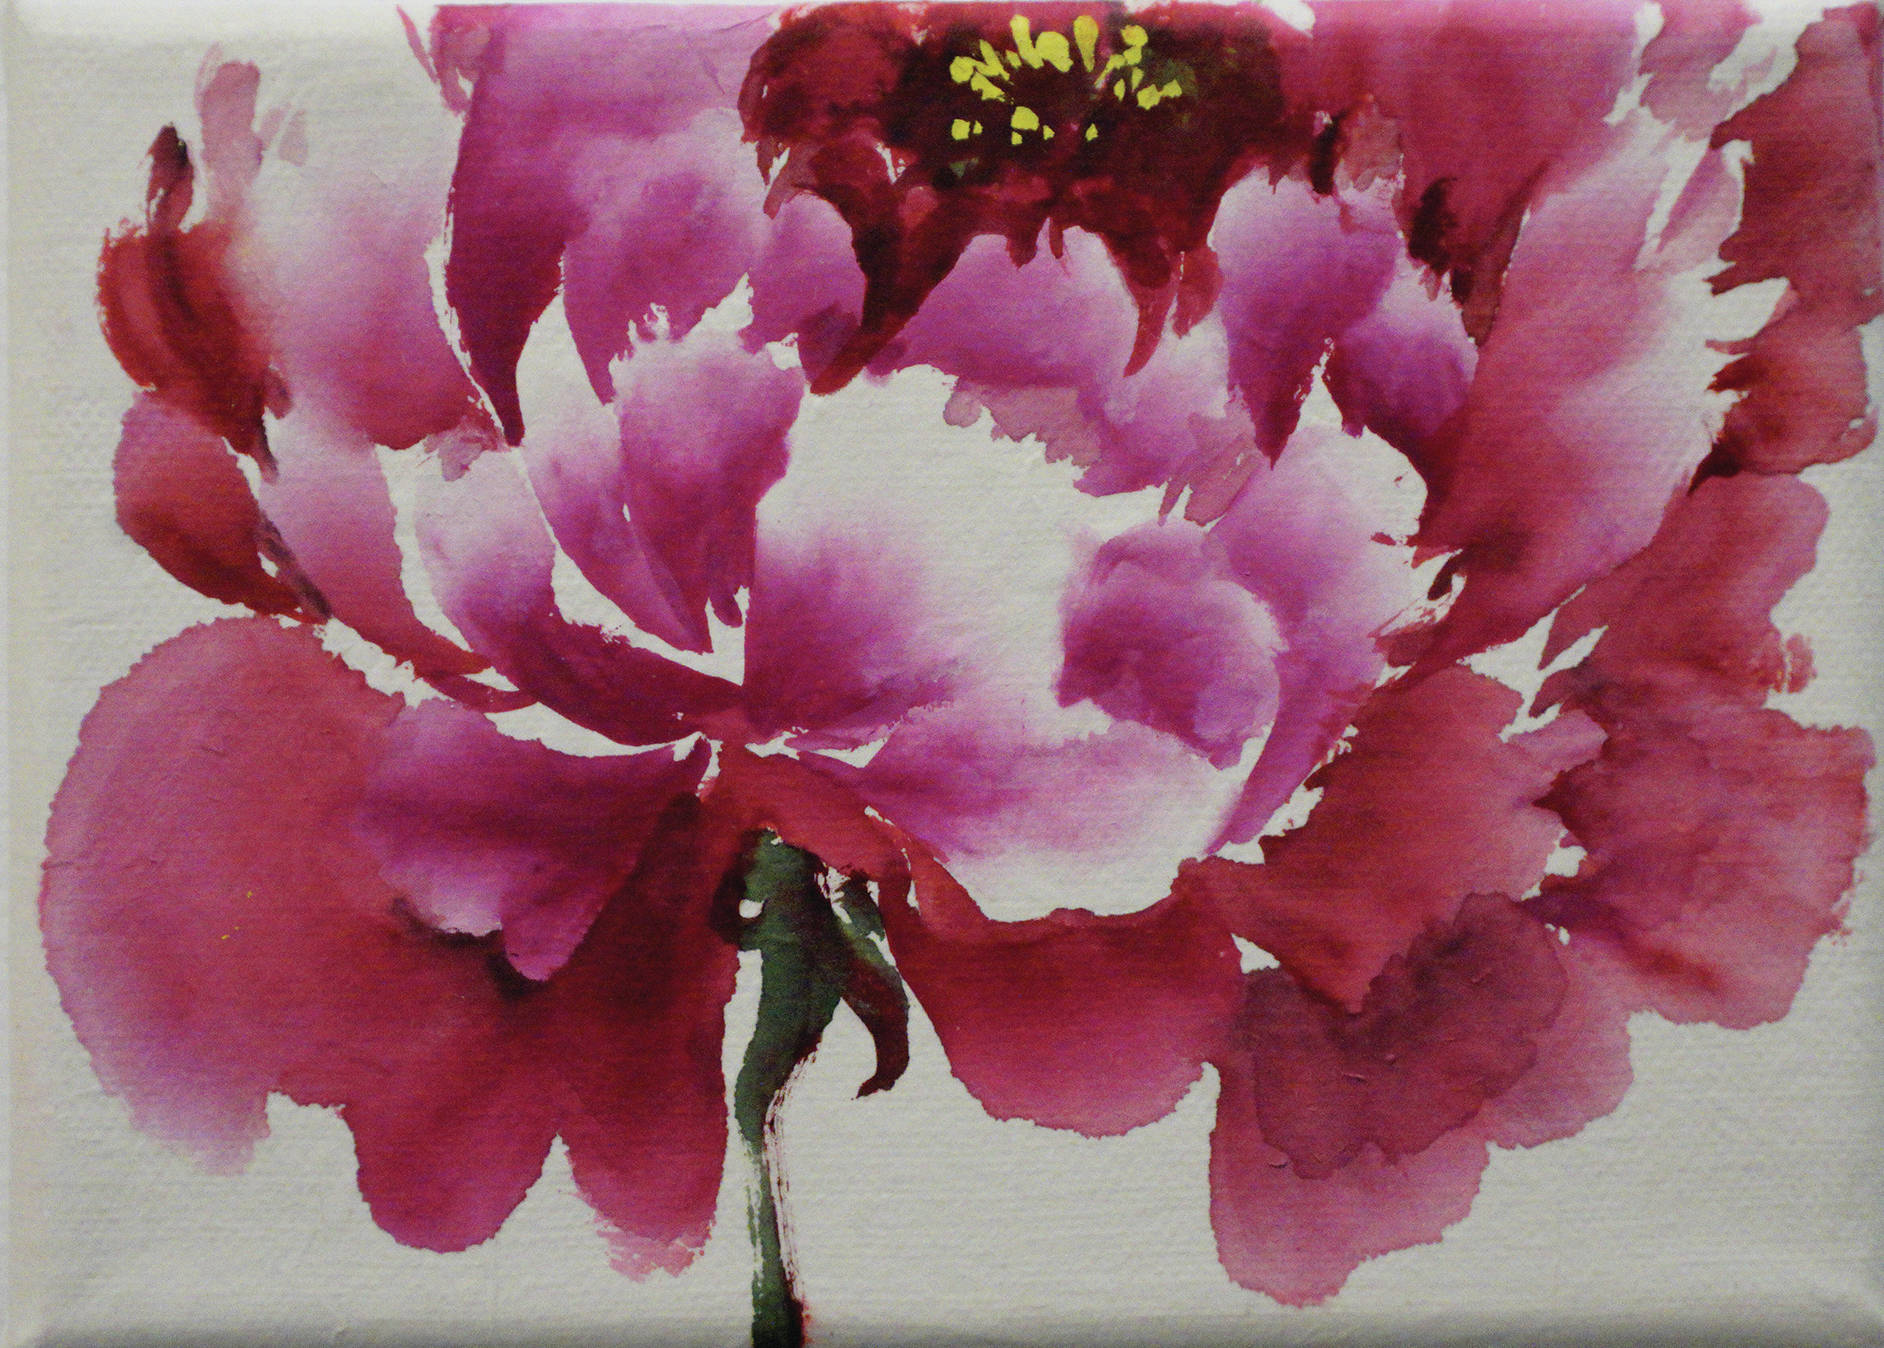 Sharlen Cline’s “Peony” is one of the pieces in the 5x7 show at the Homer Council on the Arts that opened on Nov. 1, 2019, in Homer, Alaska. (Photo by Michael Armstrong/Homer News)